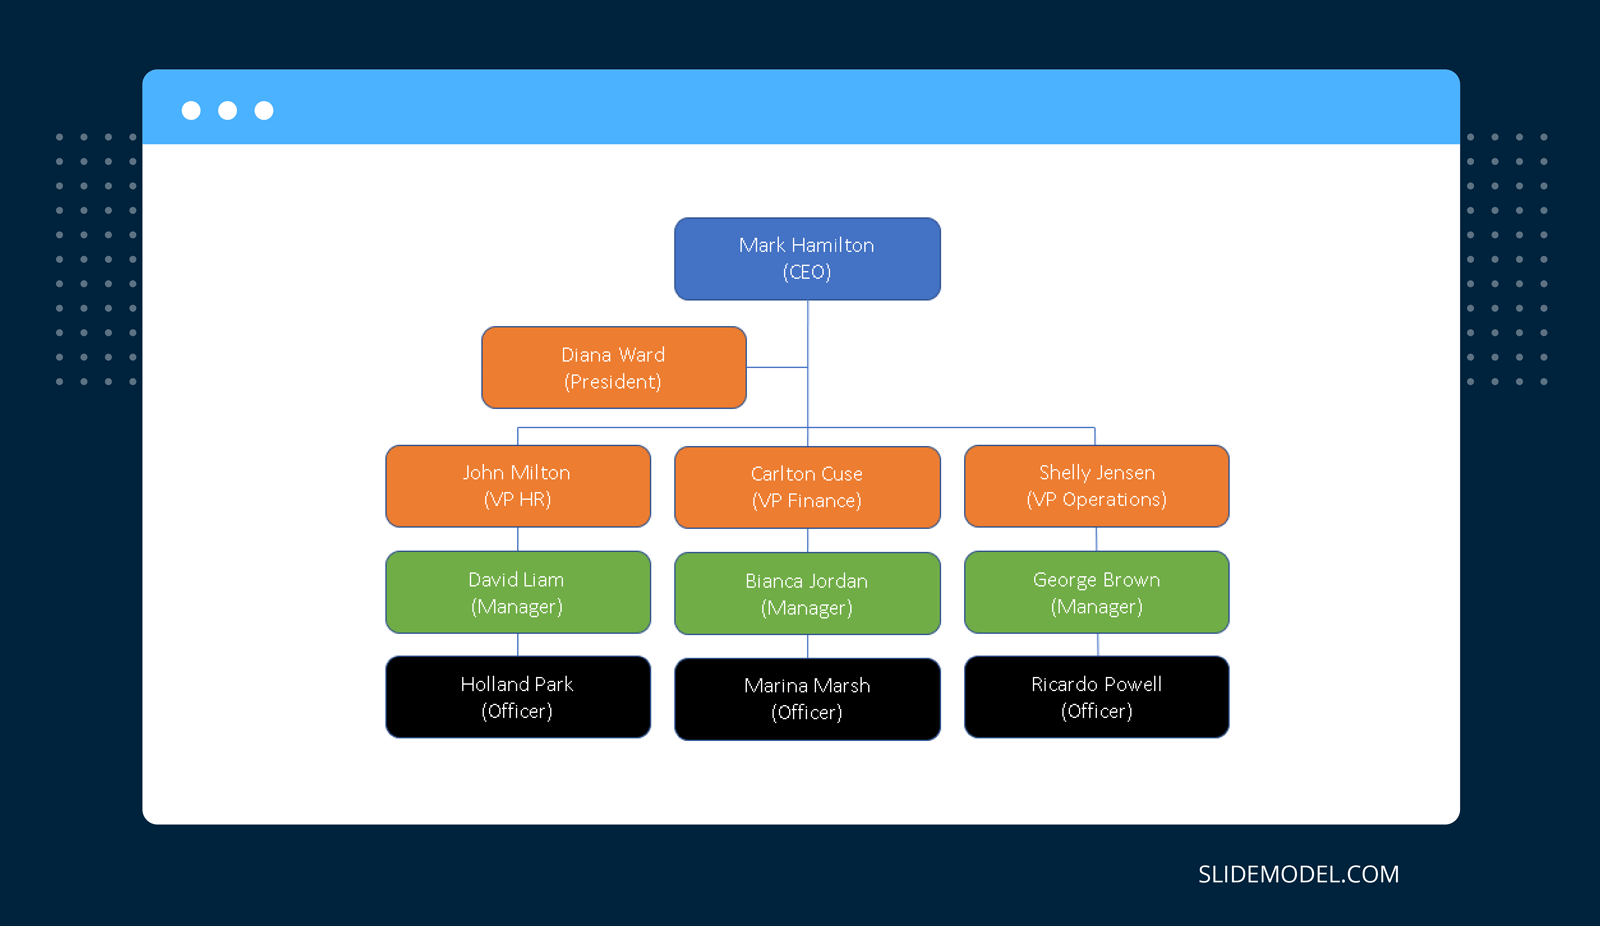 How to Format the Org Chart in PowerPoint?